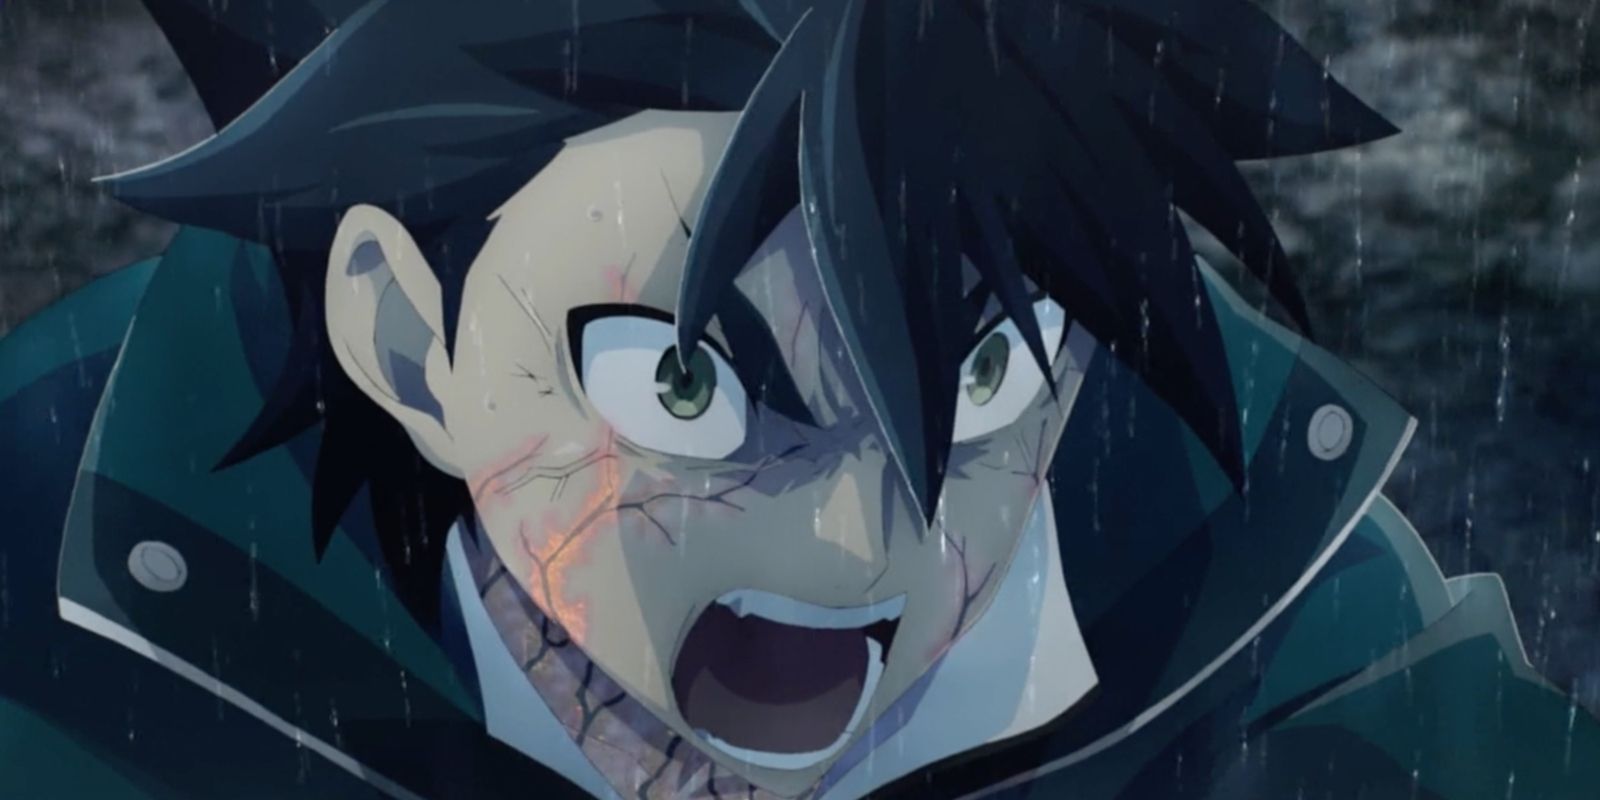 Black haired character of God Eater screaming. 